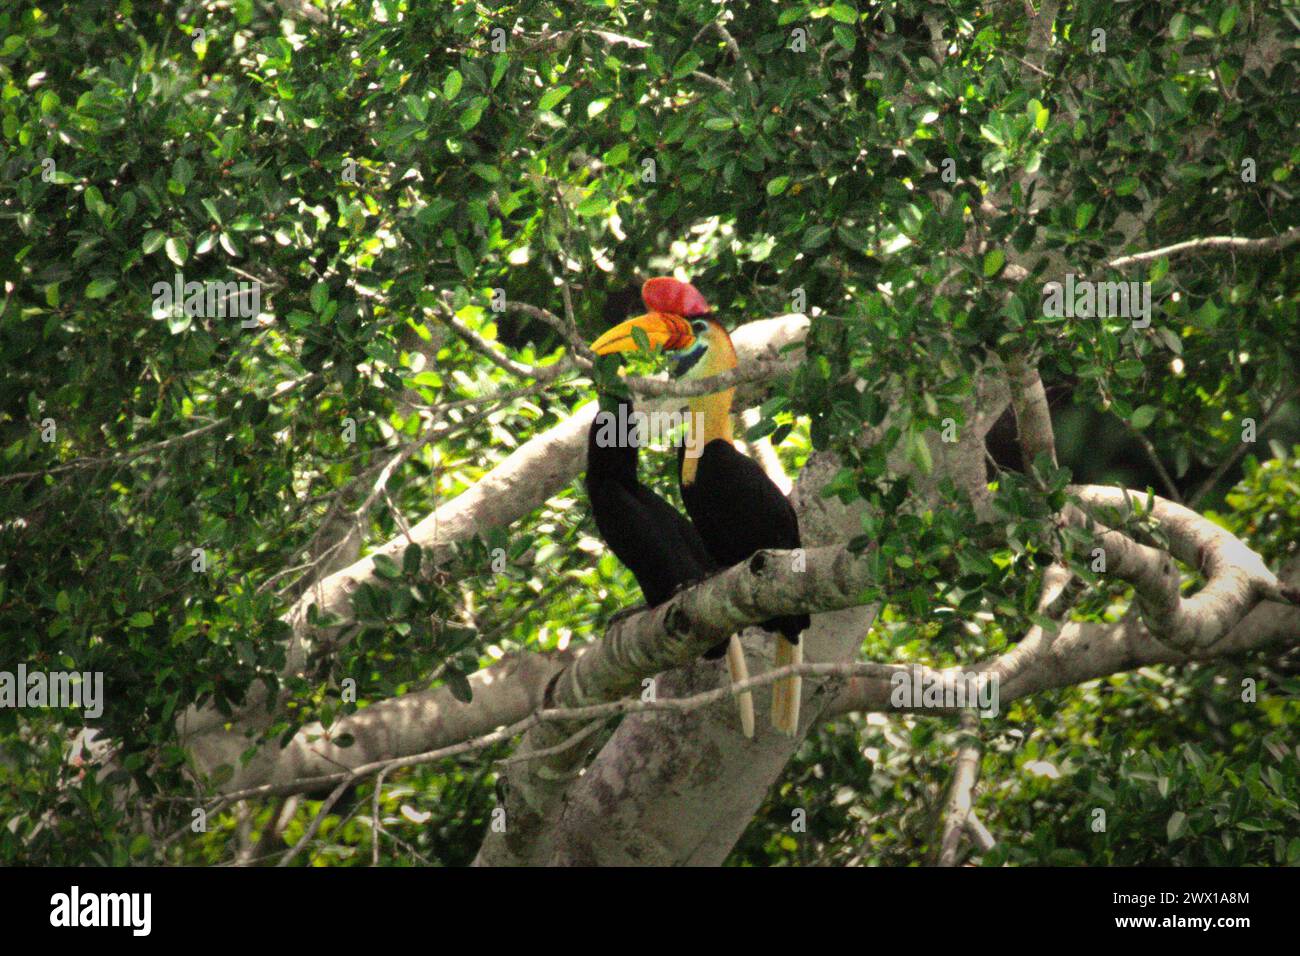 A pair of knobbed hornbills (Rhyticeros cassidix) perching on a tree branch in the shade in a vegetated area near Mount Tangkoko and Mount Duasudara (Dua Saudara) in Bitung, North Sulawesi, Indonesia. A report by a team of scientists led by Marine Joly, based on research conducted since 2012 to 2020, has revealed that the temperature is increasing by up to 0.2 degree Celsius per year in Tangkoko forest, and the overall fruit abundance is also decreased. 'Rising temperatures caused by climate change can disrupt the delicate balance of ecosystems. Stock Photo